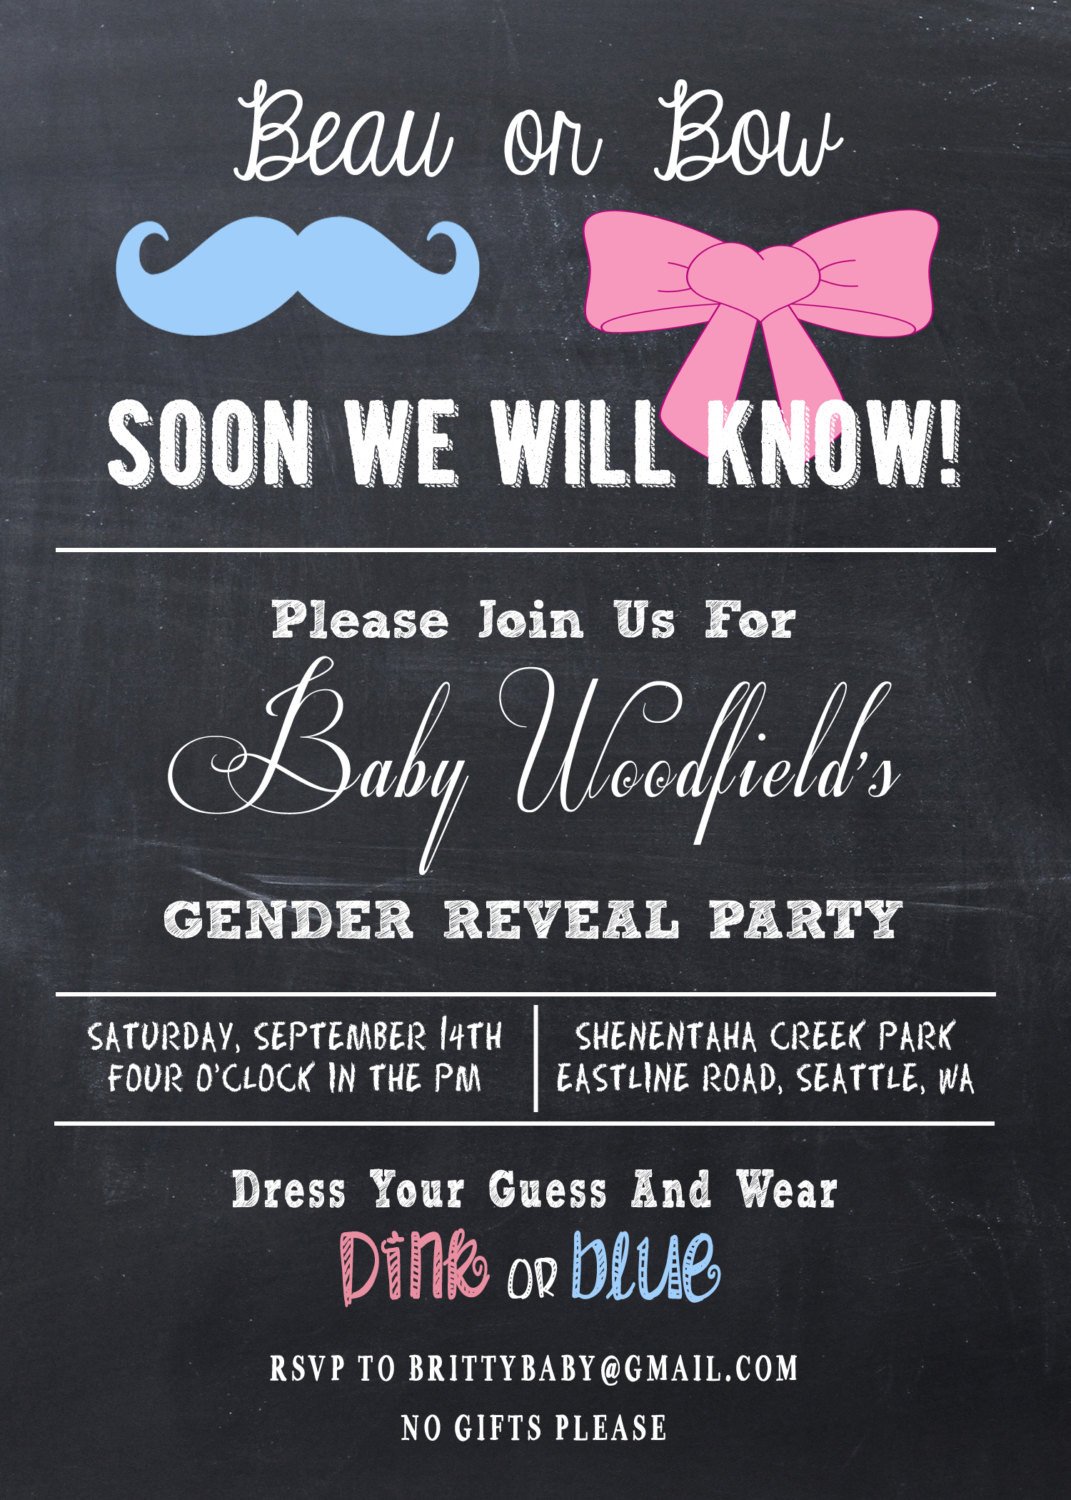 Gender Reveal Party Invitation Beau or Bow by